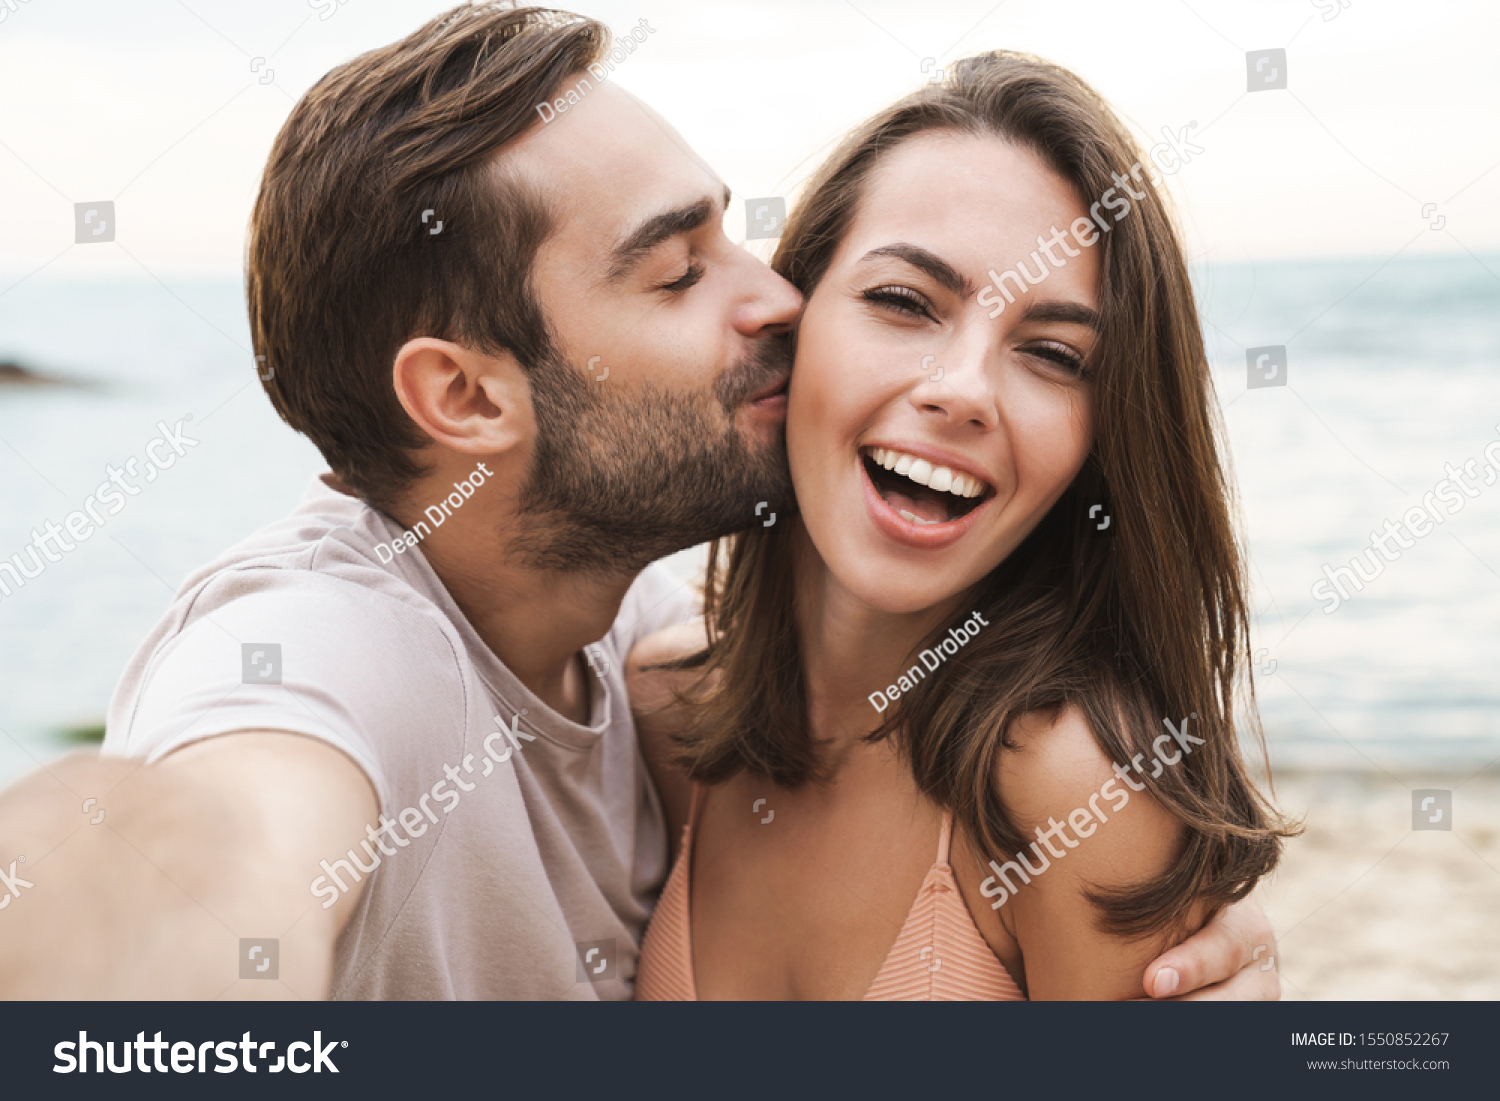 Image of young happy man kissing and hugging beautiful woman while taking selfie photo on sunny beach #1550852267